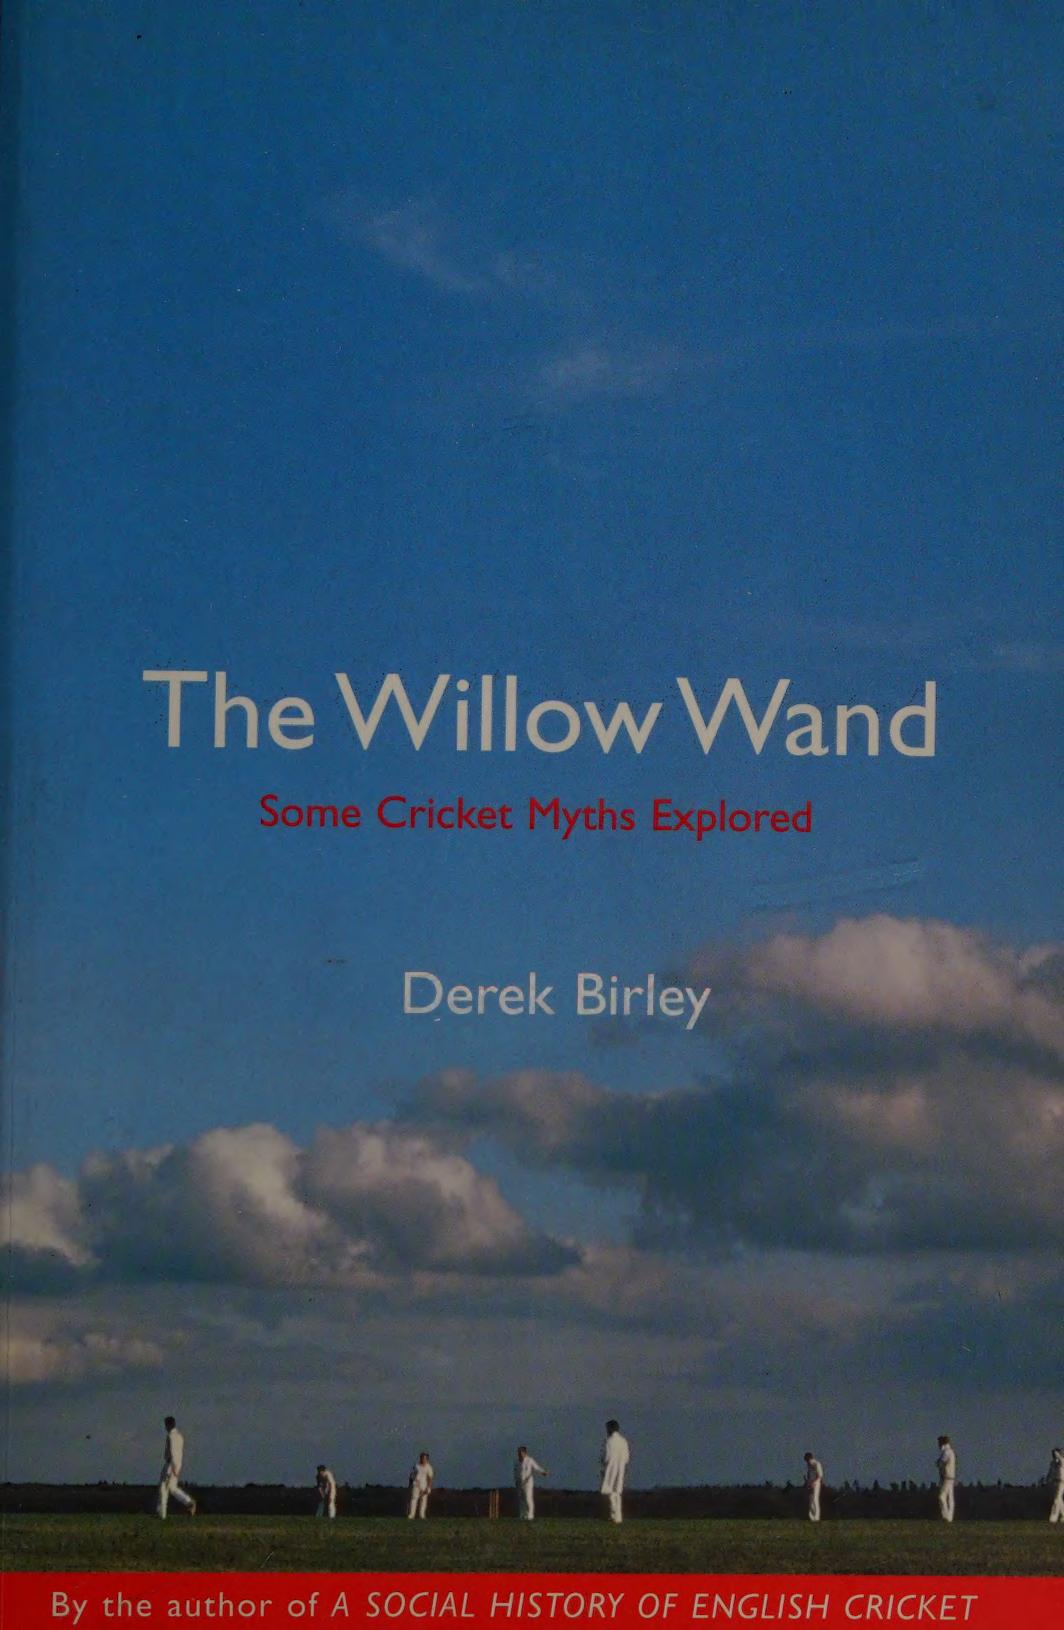 The willow wand Some Cricket Myths Explored by Derek Birley